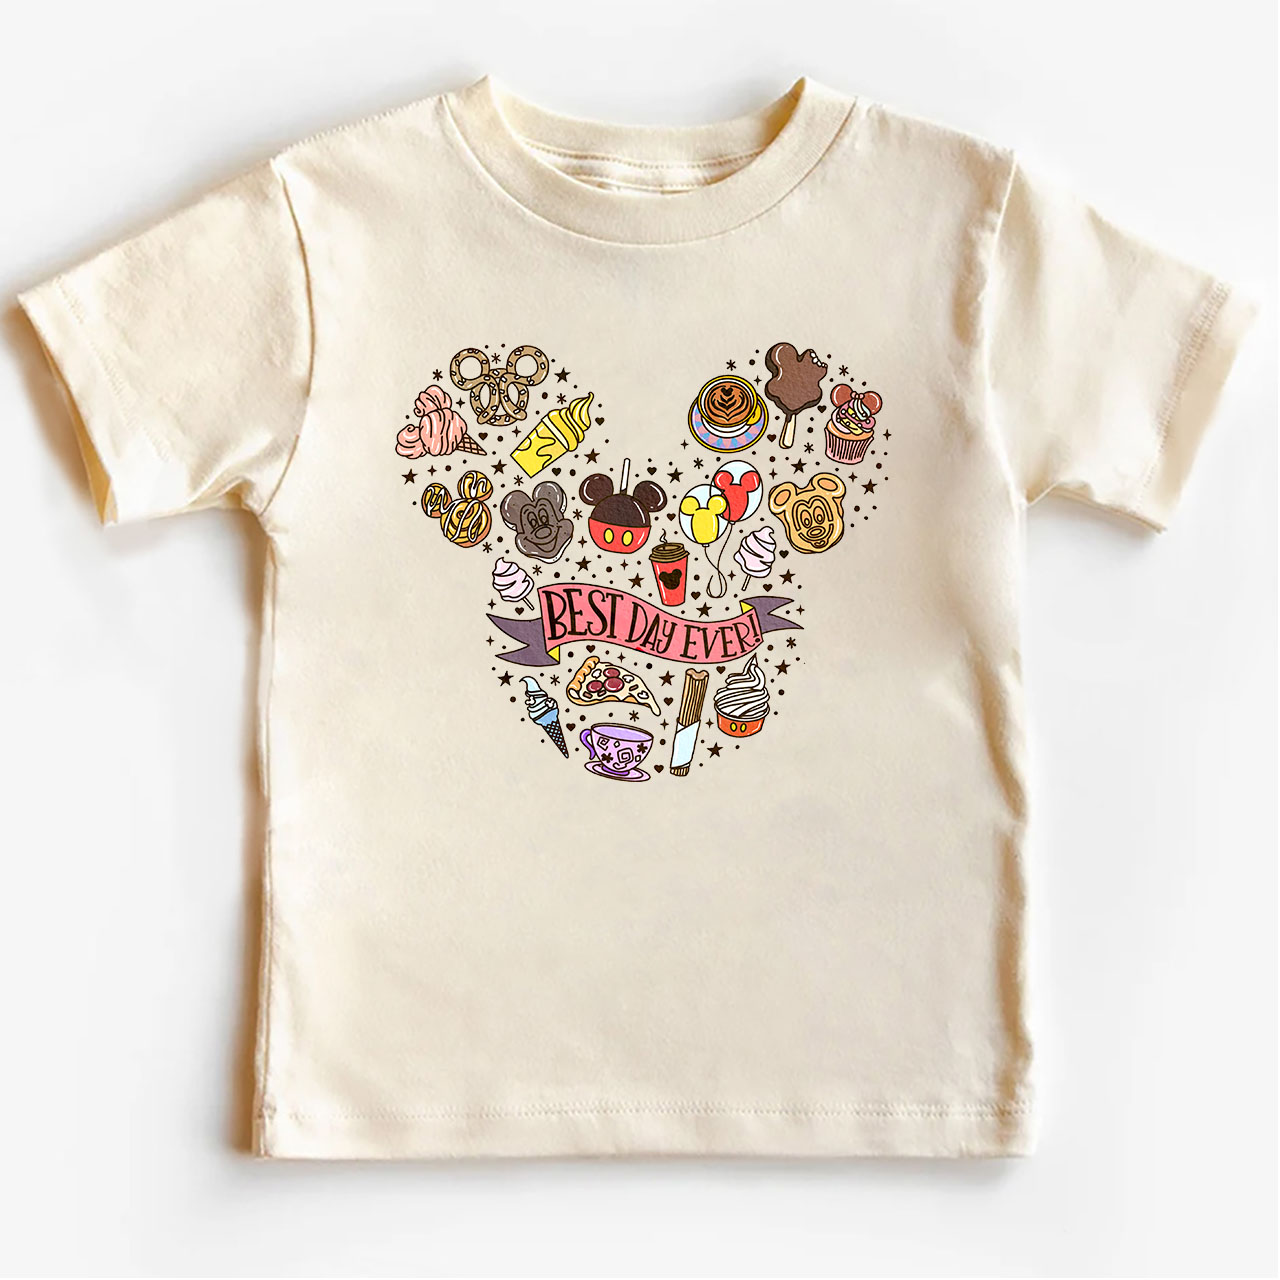 Best Day Ever Cute Shirt For Kids